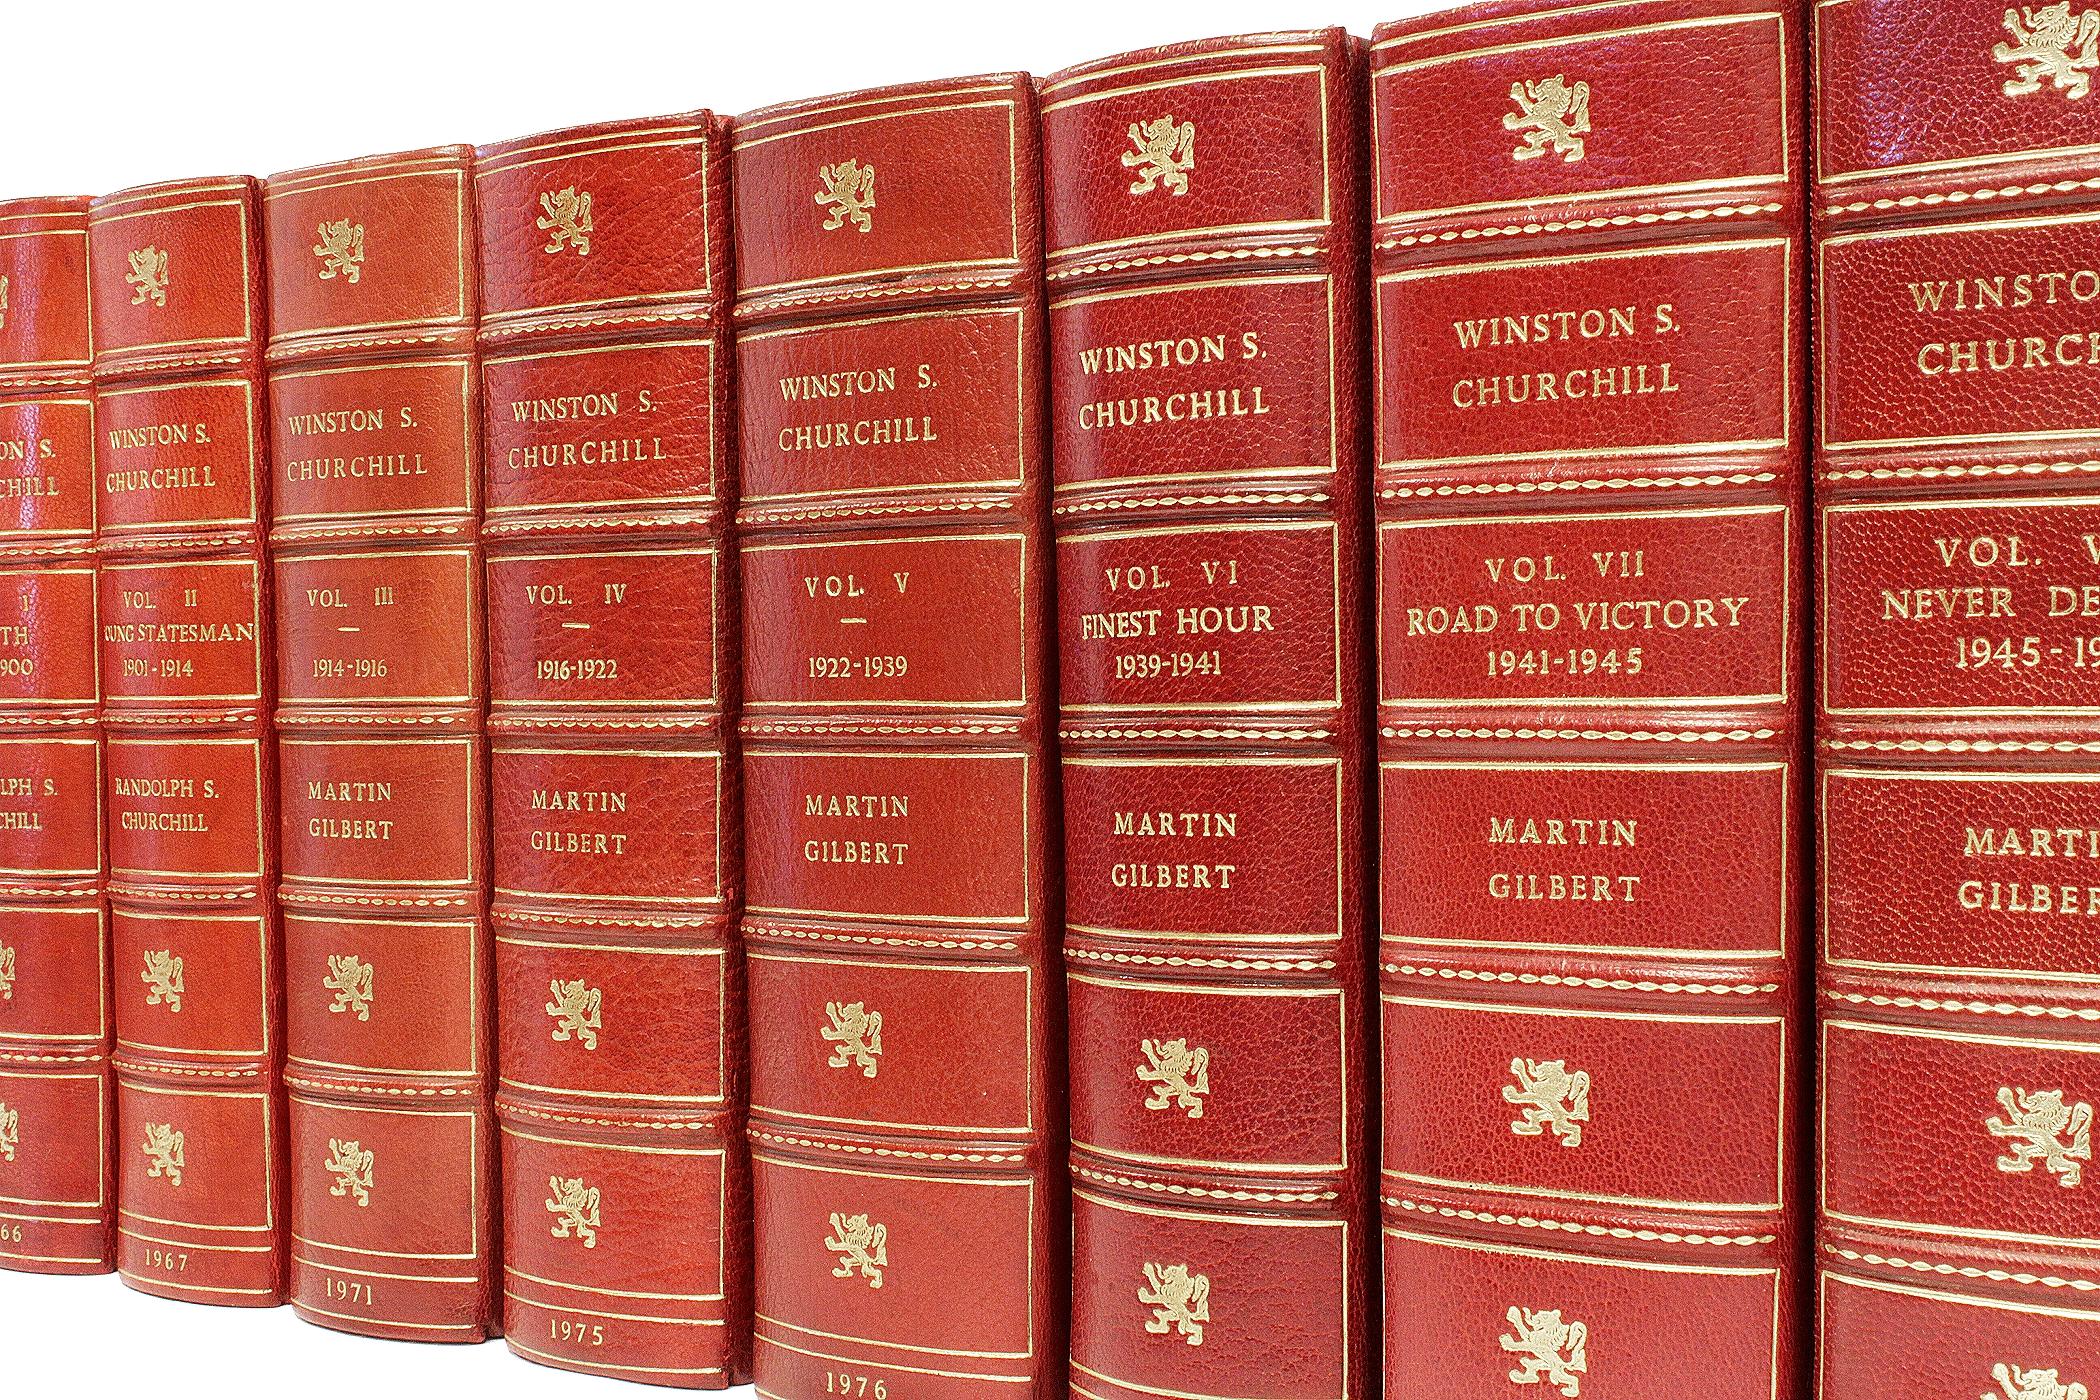 AUTHOR: CHURCHILL, Randolph S., continued by Martin Gilbert. 

TITLE: The Life of Winston Churchill.

PUBLISHER: London: Heinemann, 1966-88.

DESCRIPTION: ALL FIRST EDITIONS. 8 vols., 9-3/8